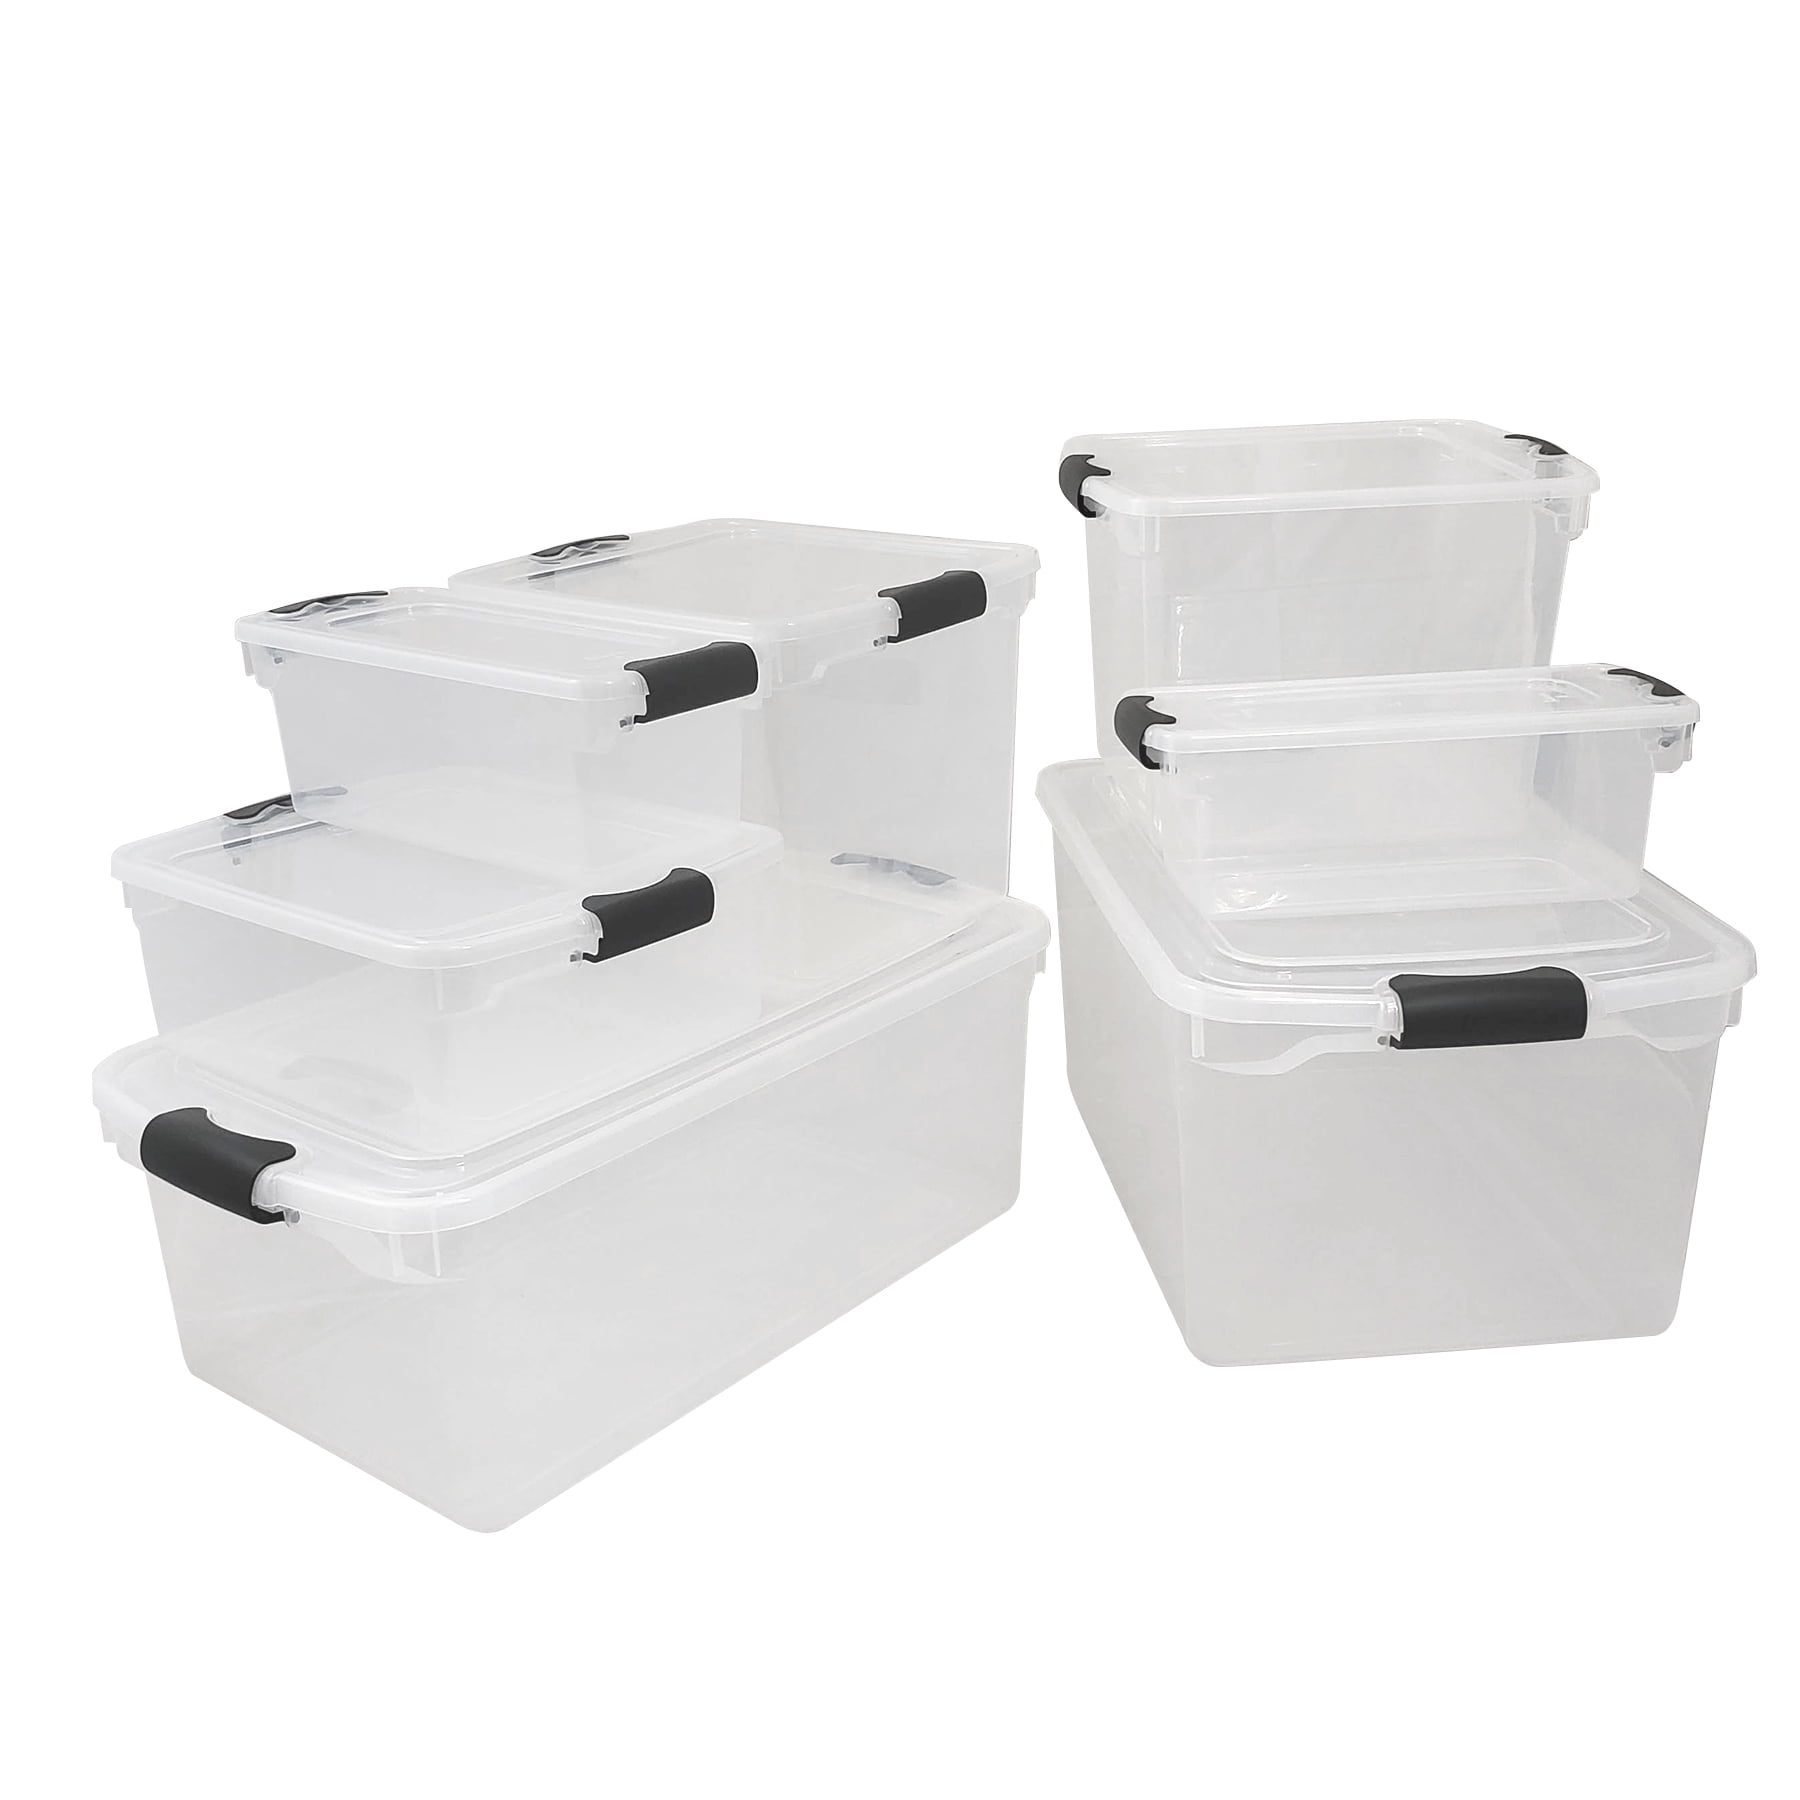 Homz Multipurpose 66 Quart Clear Storage Container Tote Bins with Secure  Latching Lids for Home or Office Organization, (2 Pack)